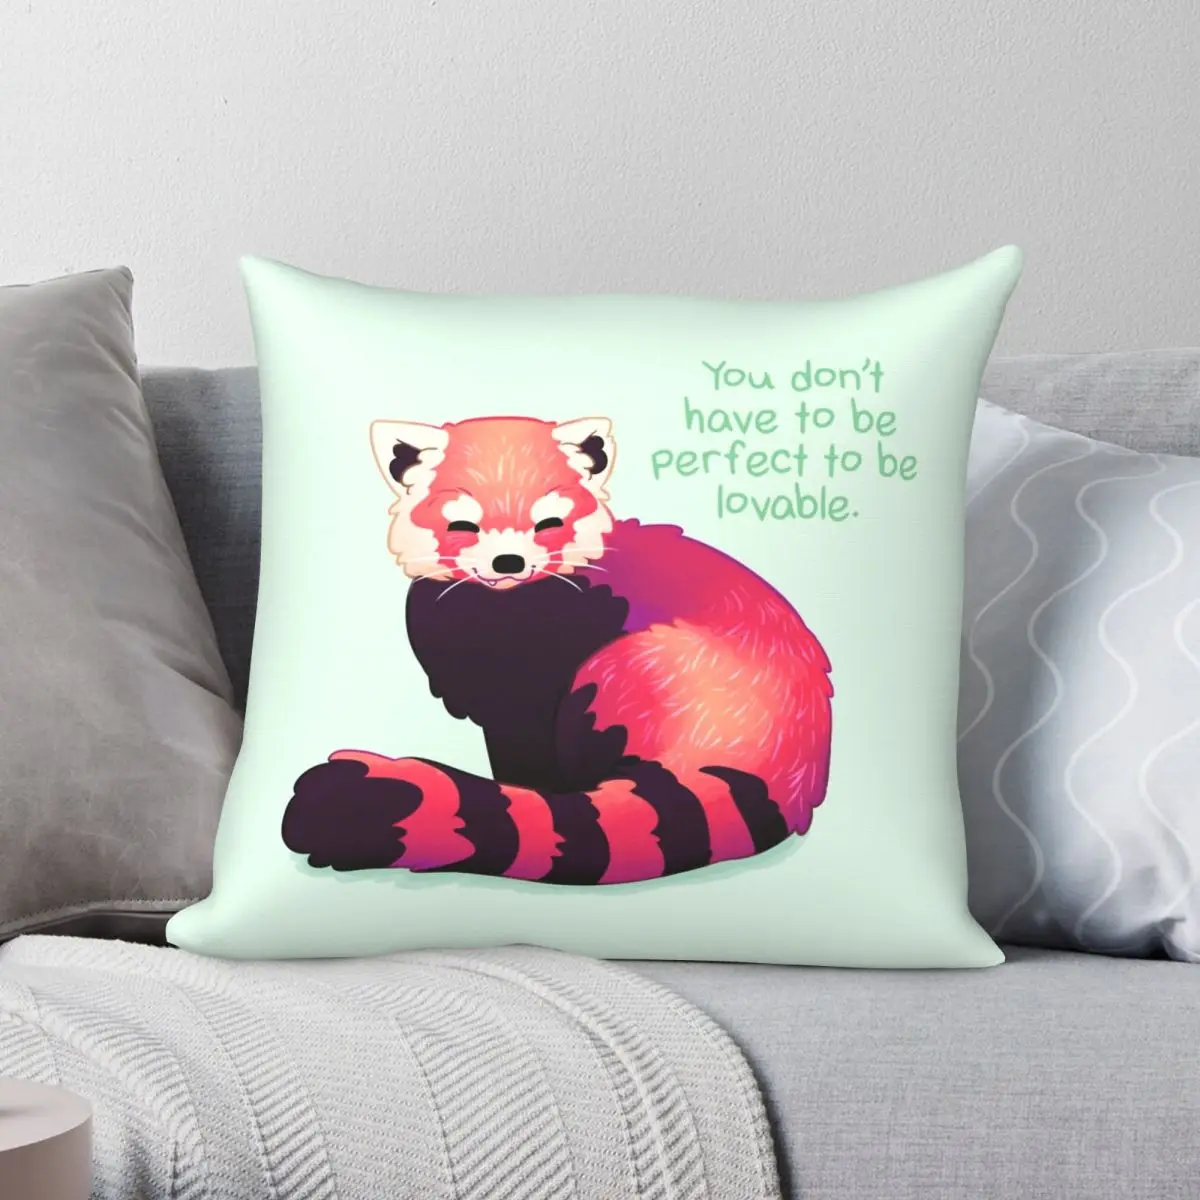 

You Don't Have To Be Lovable Red Fox Pillowcase Polyester Linen Velvet Creative Zip Decor Throw Pillow Case Sofa Cushion Cover